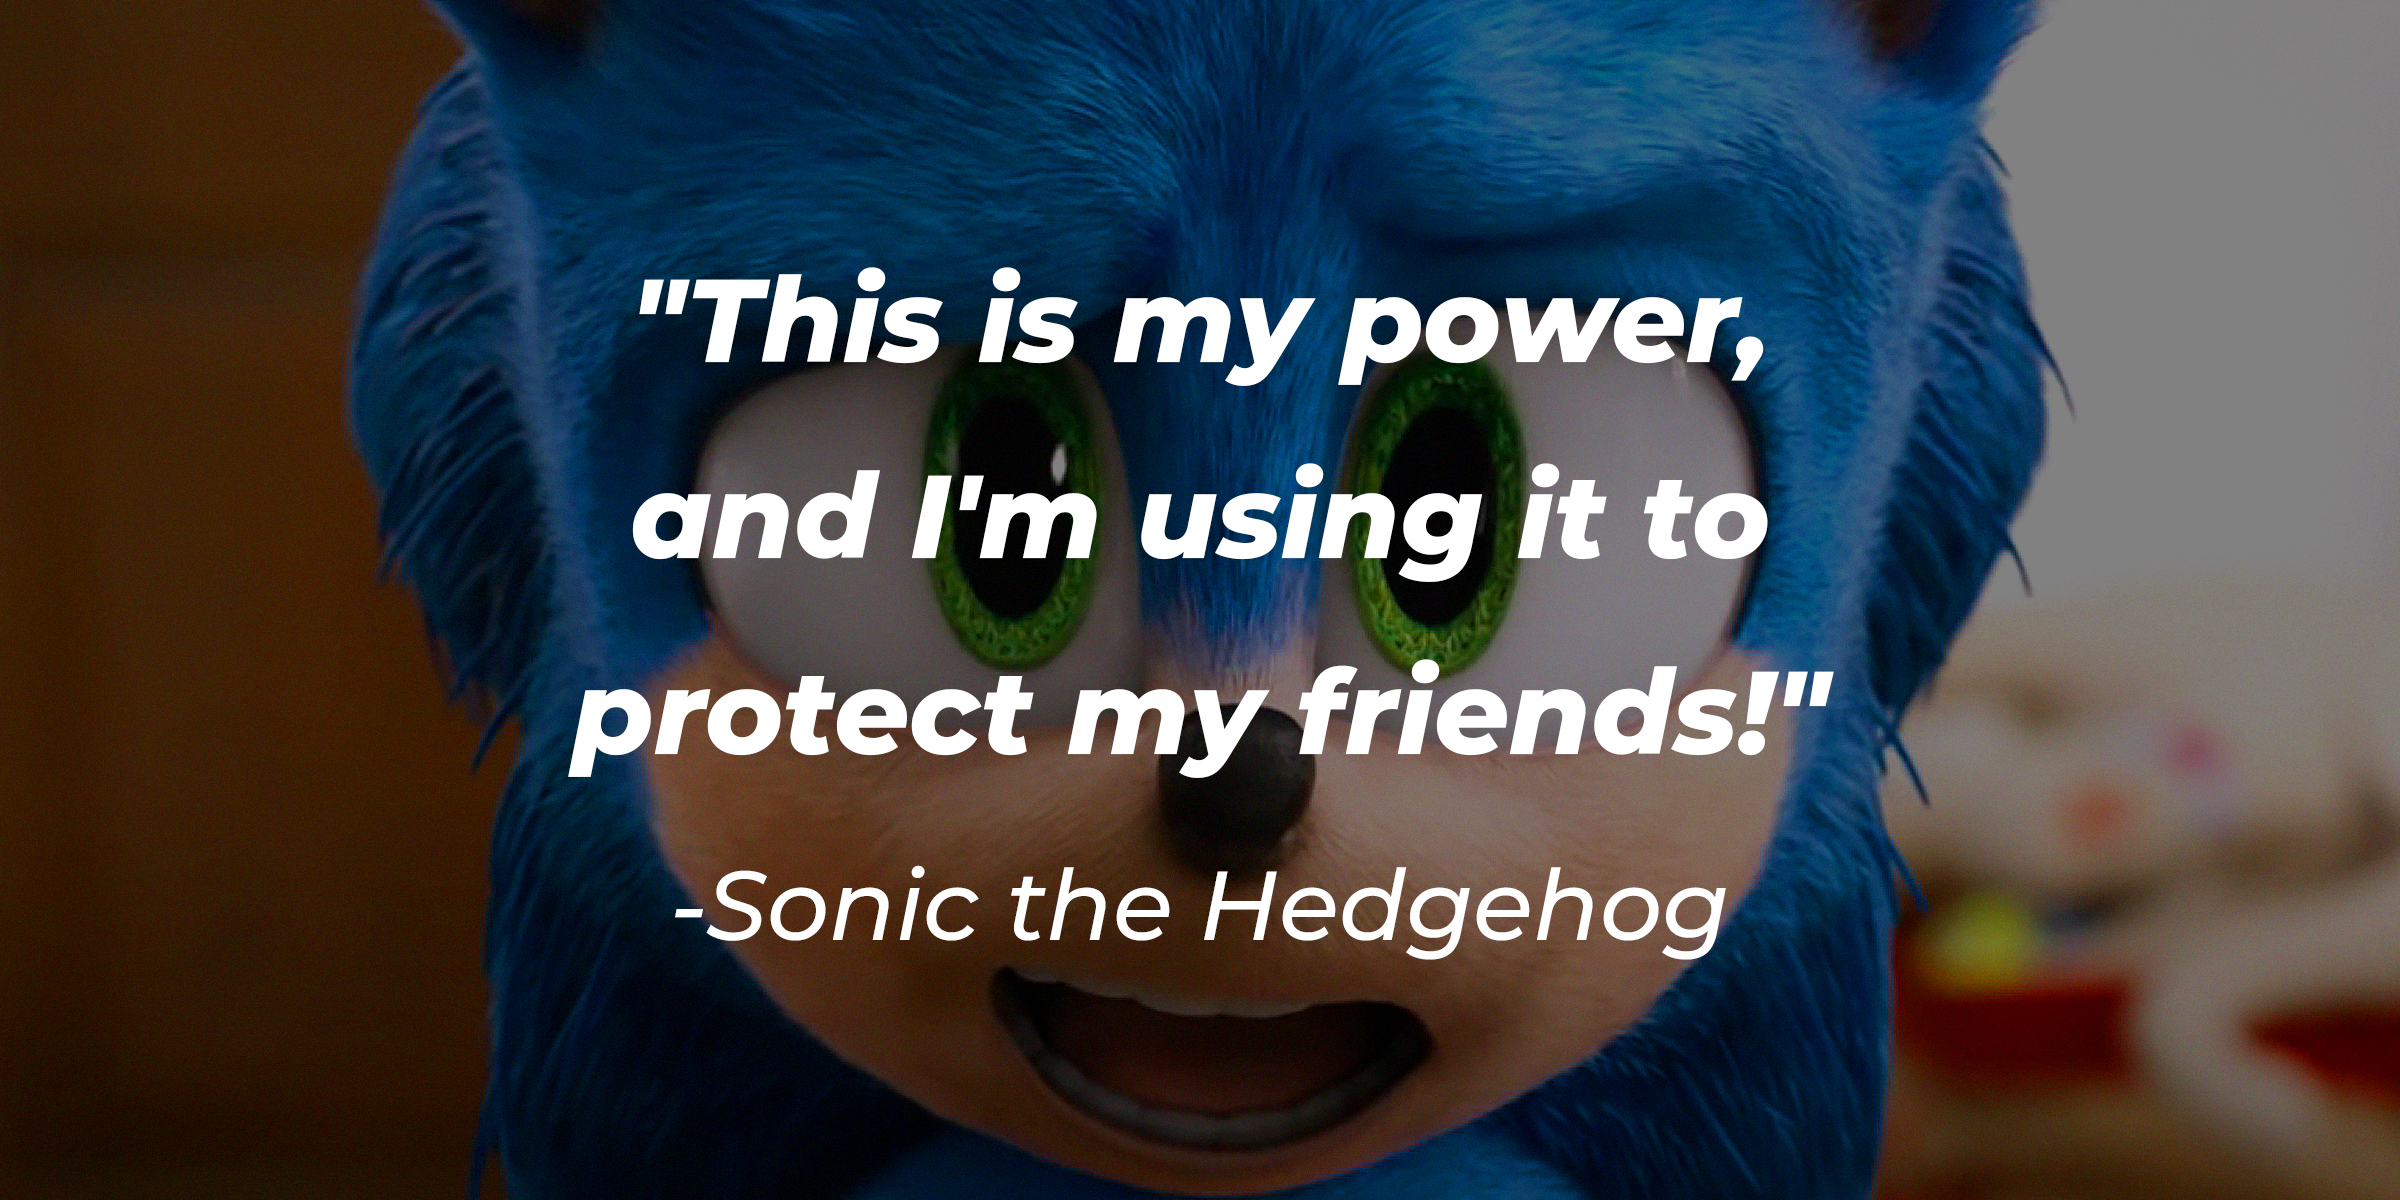 Sonic's quote: "This is my power, and I'm using it to protect my friends!" | Source: YouTube/Paramountpictures